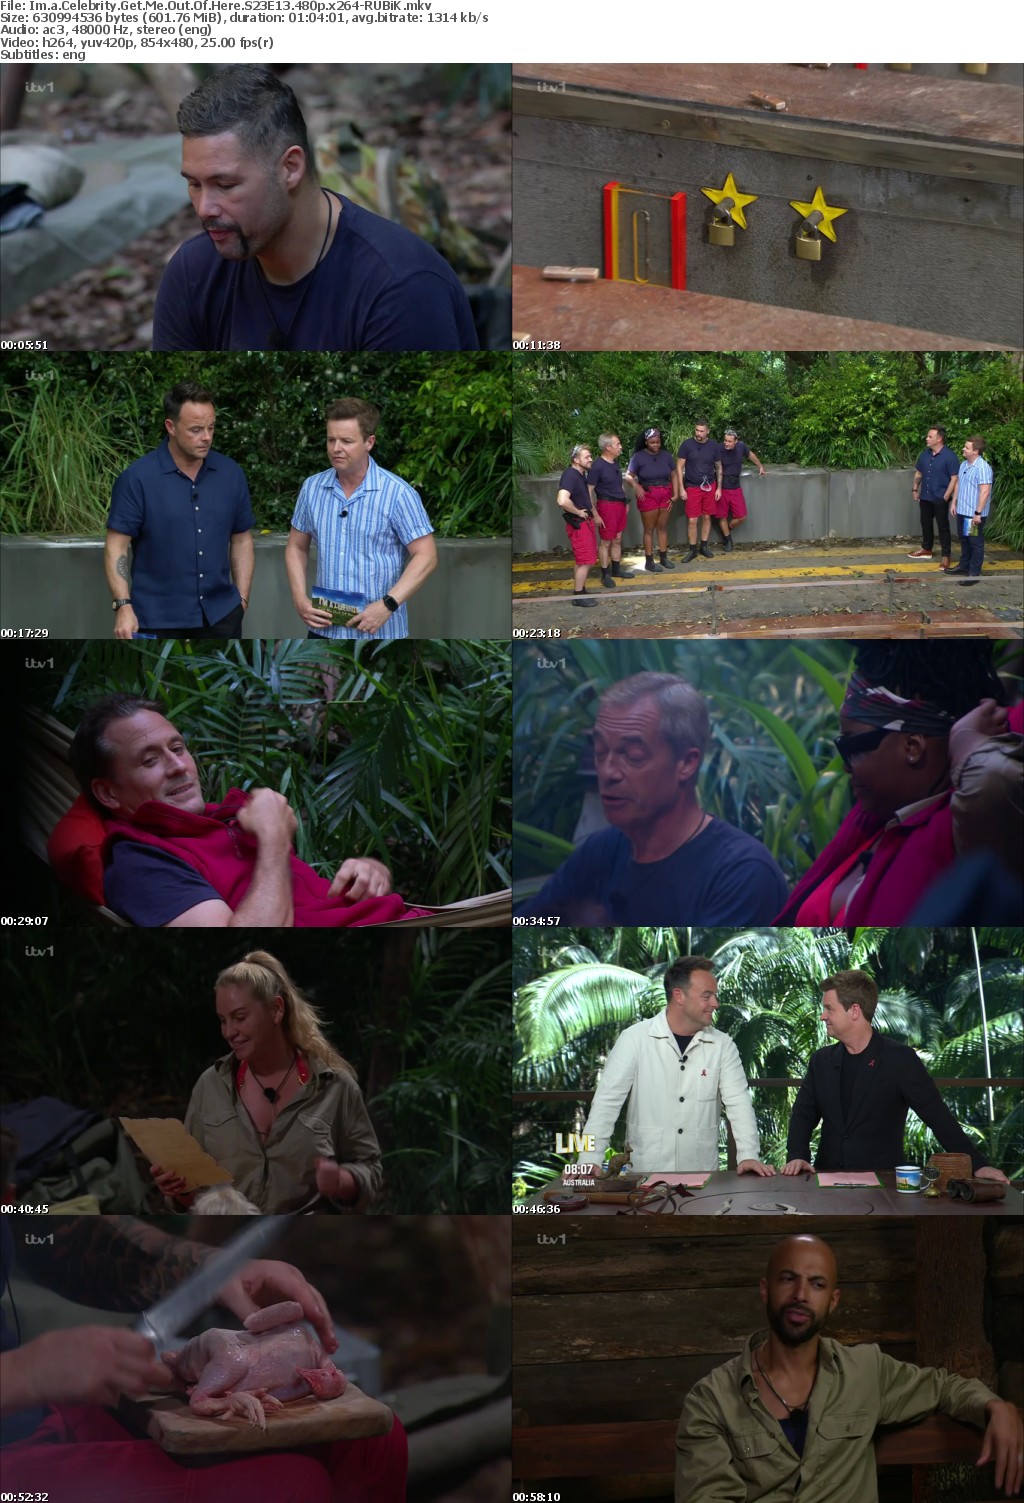 Im a Celebrity Get Me Out Of Here S23E13 480p x264-RUBiK